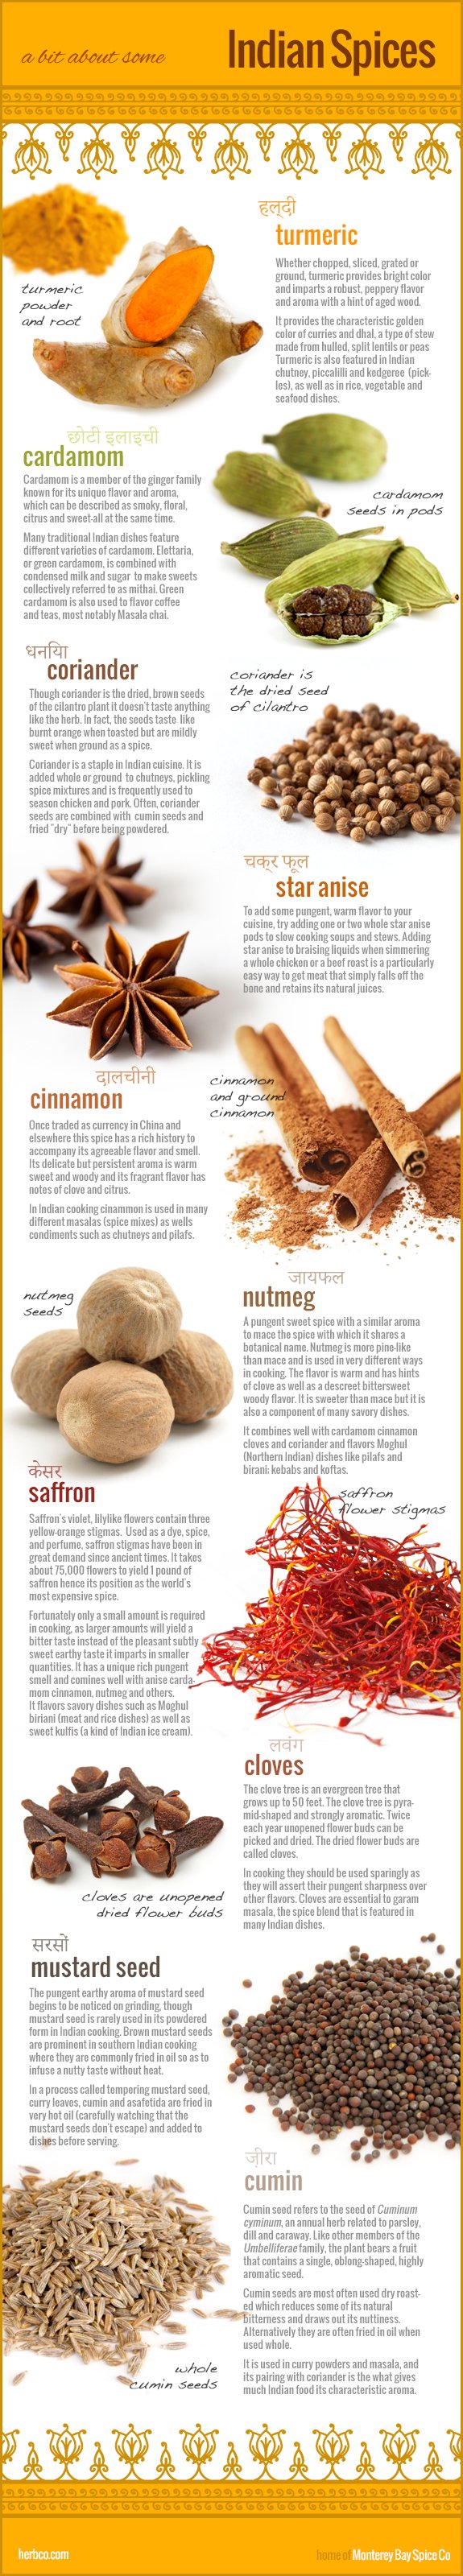 Indian-Spices-Infographic